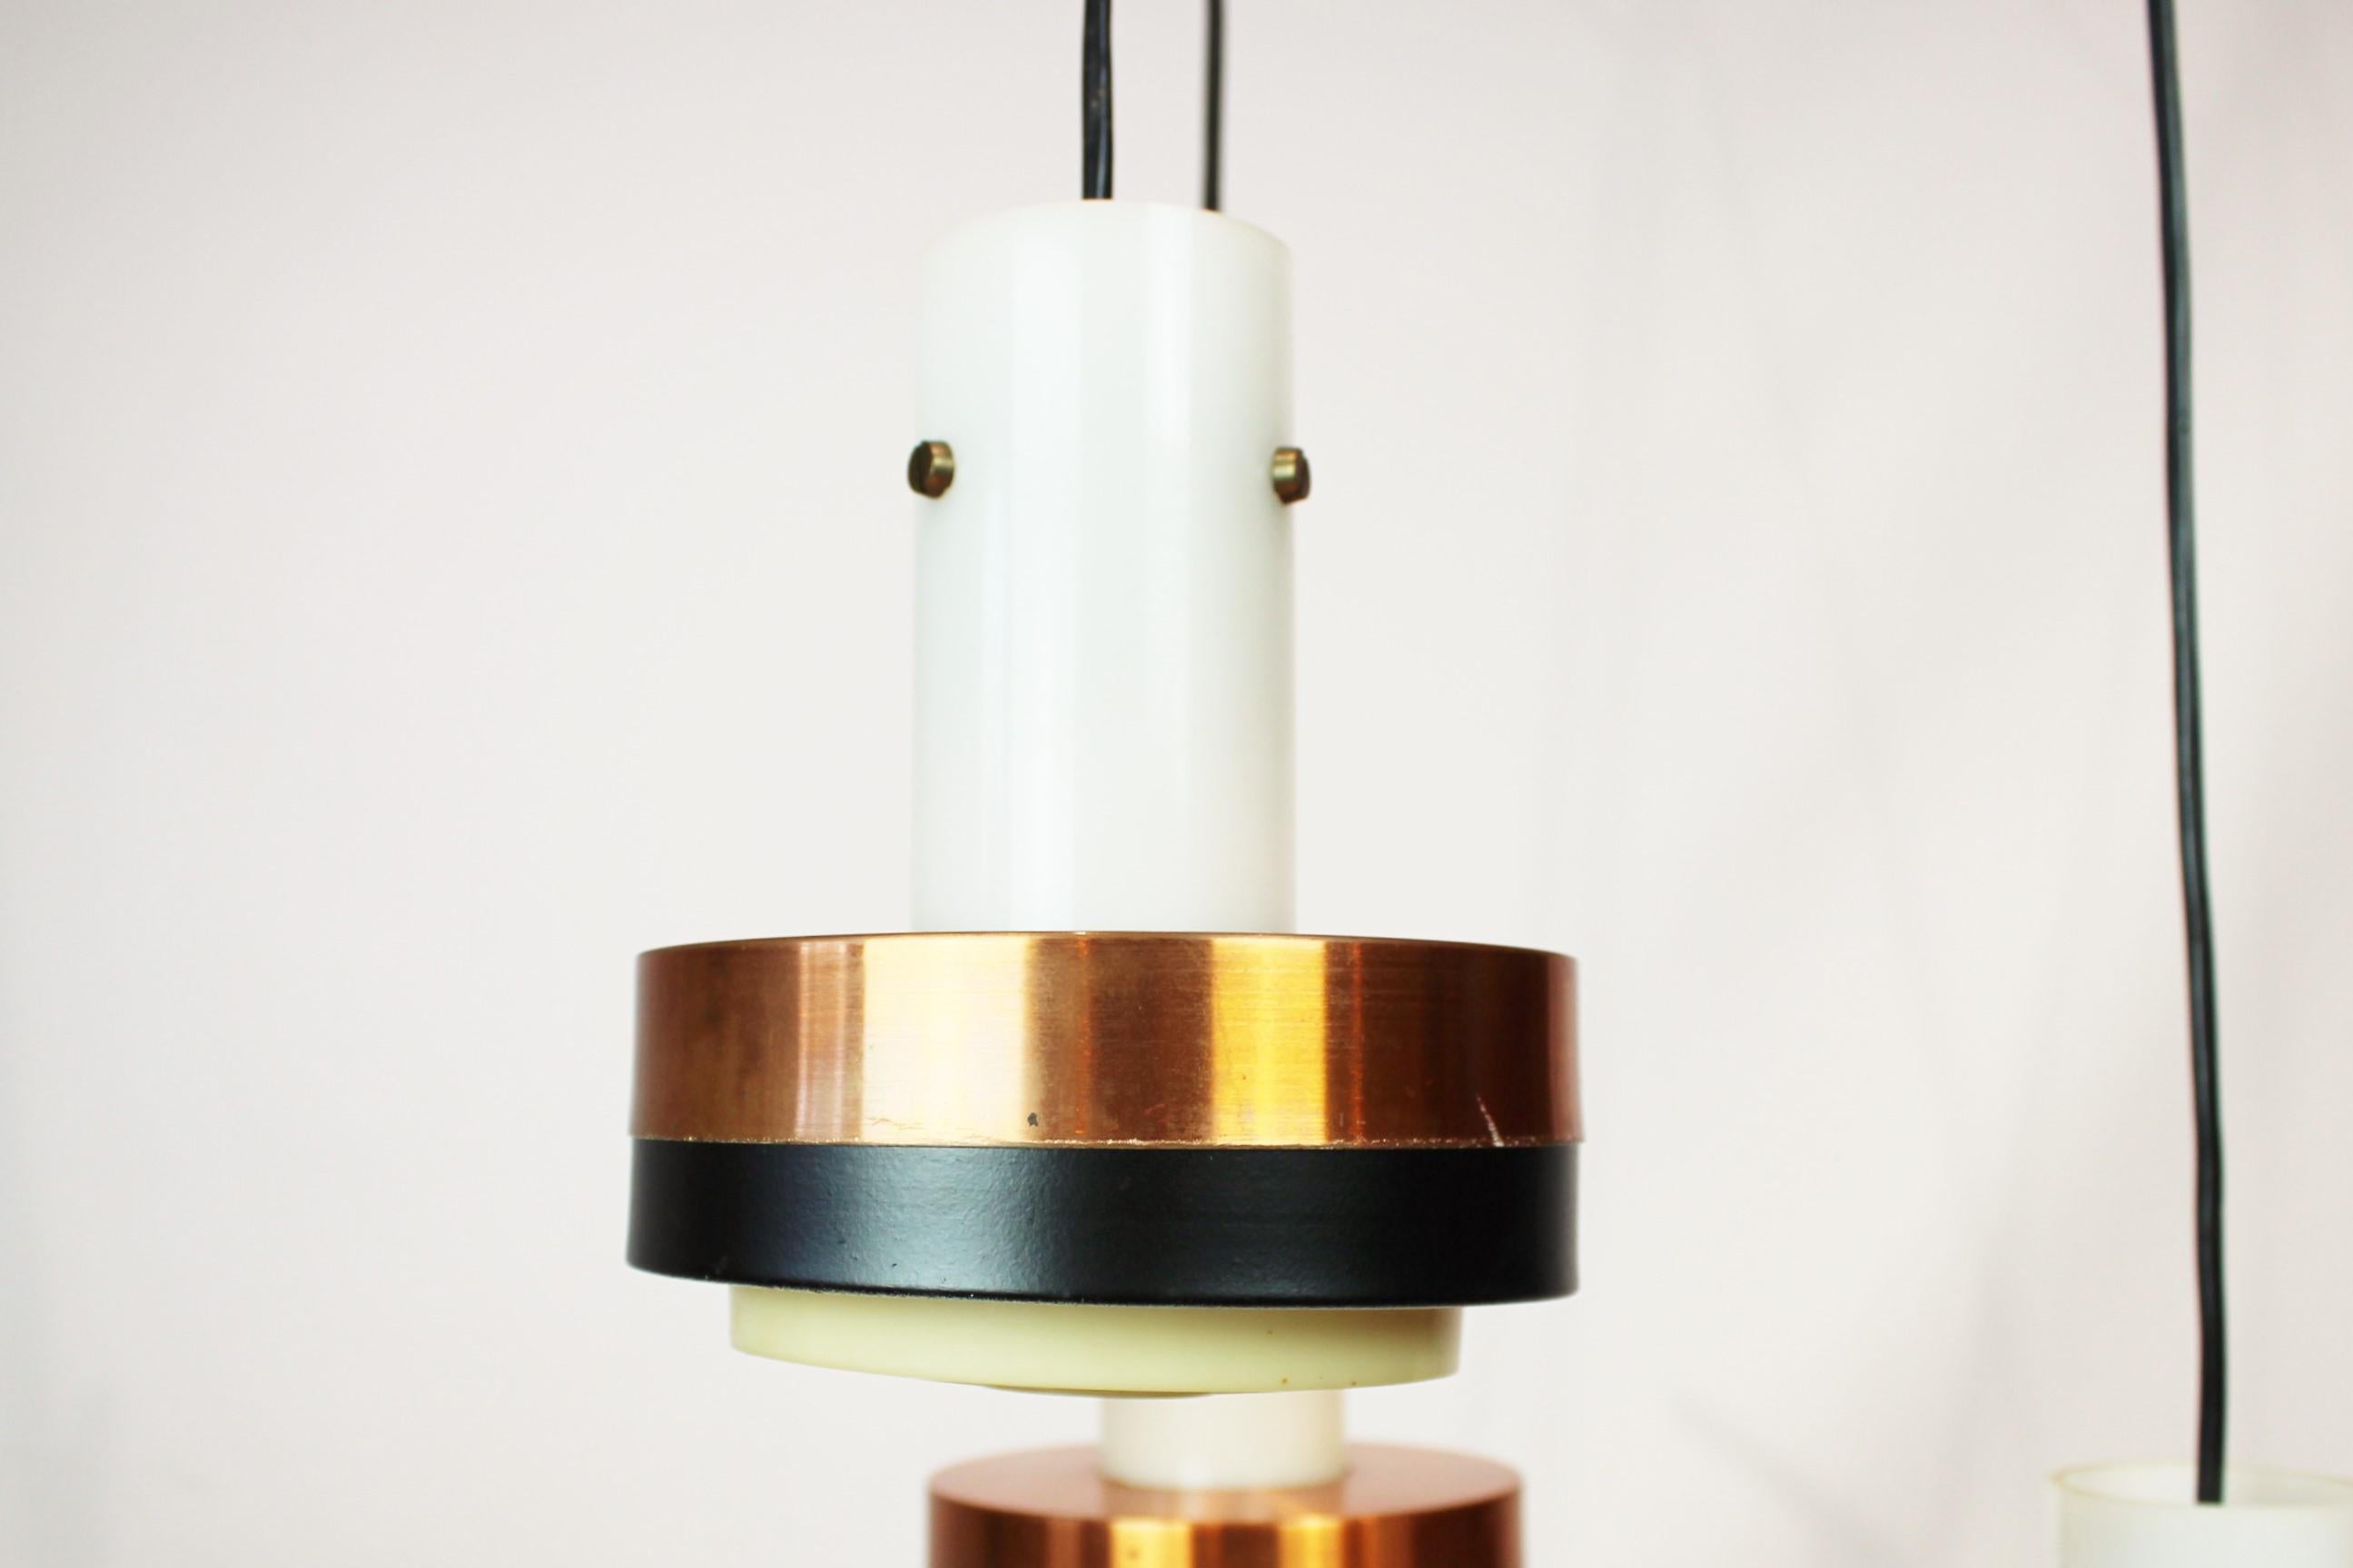 The ceiling pendant from the 1960s, crafted in copper and rosewood, showcases the iconic Danish design ethos of functional elegance. With its sleek lines and organic materials, this pendant exudes mid-century modern charm while embodying the